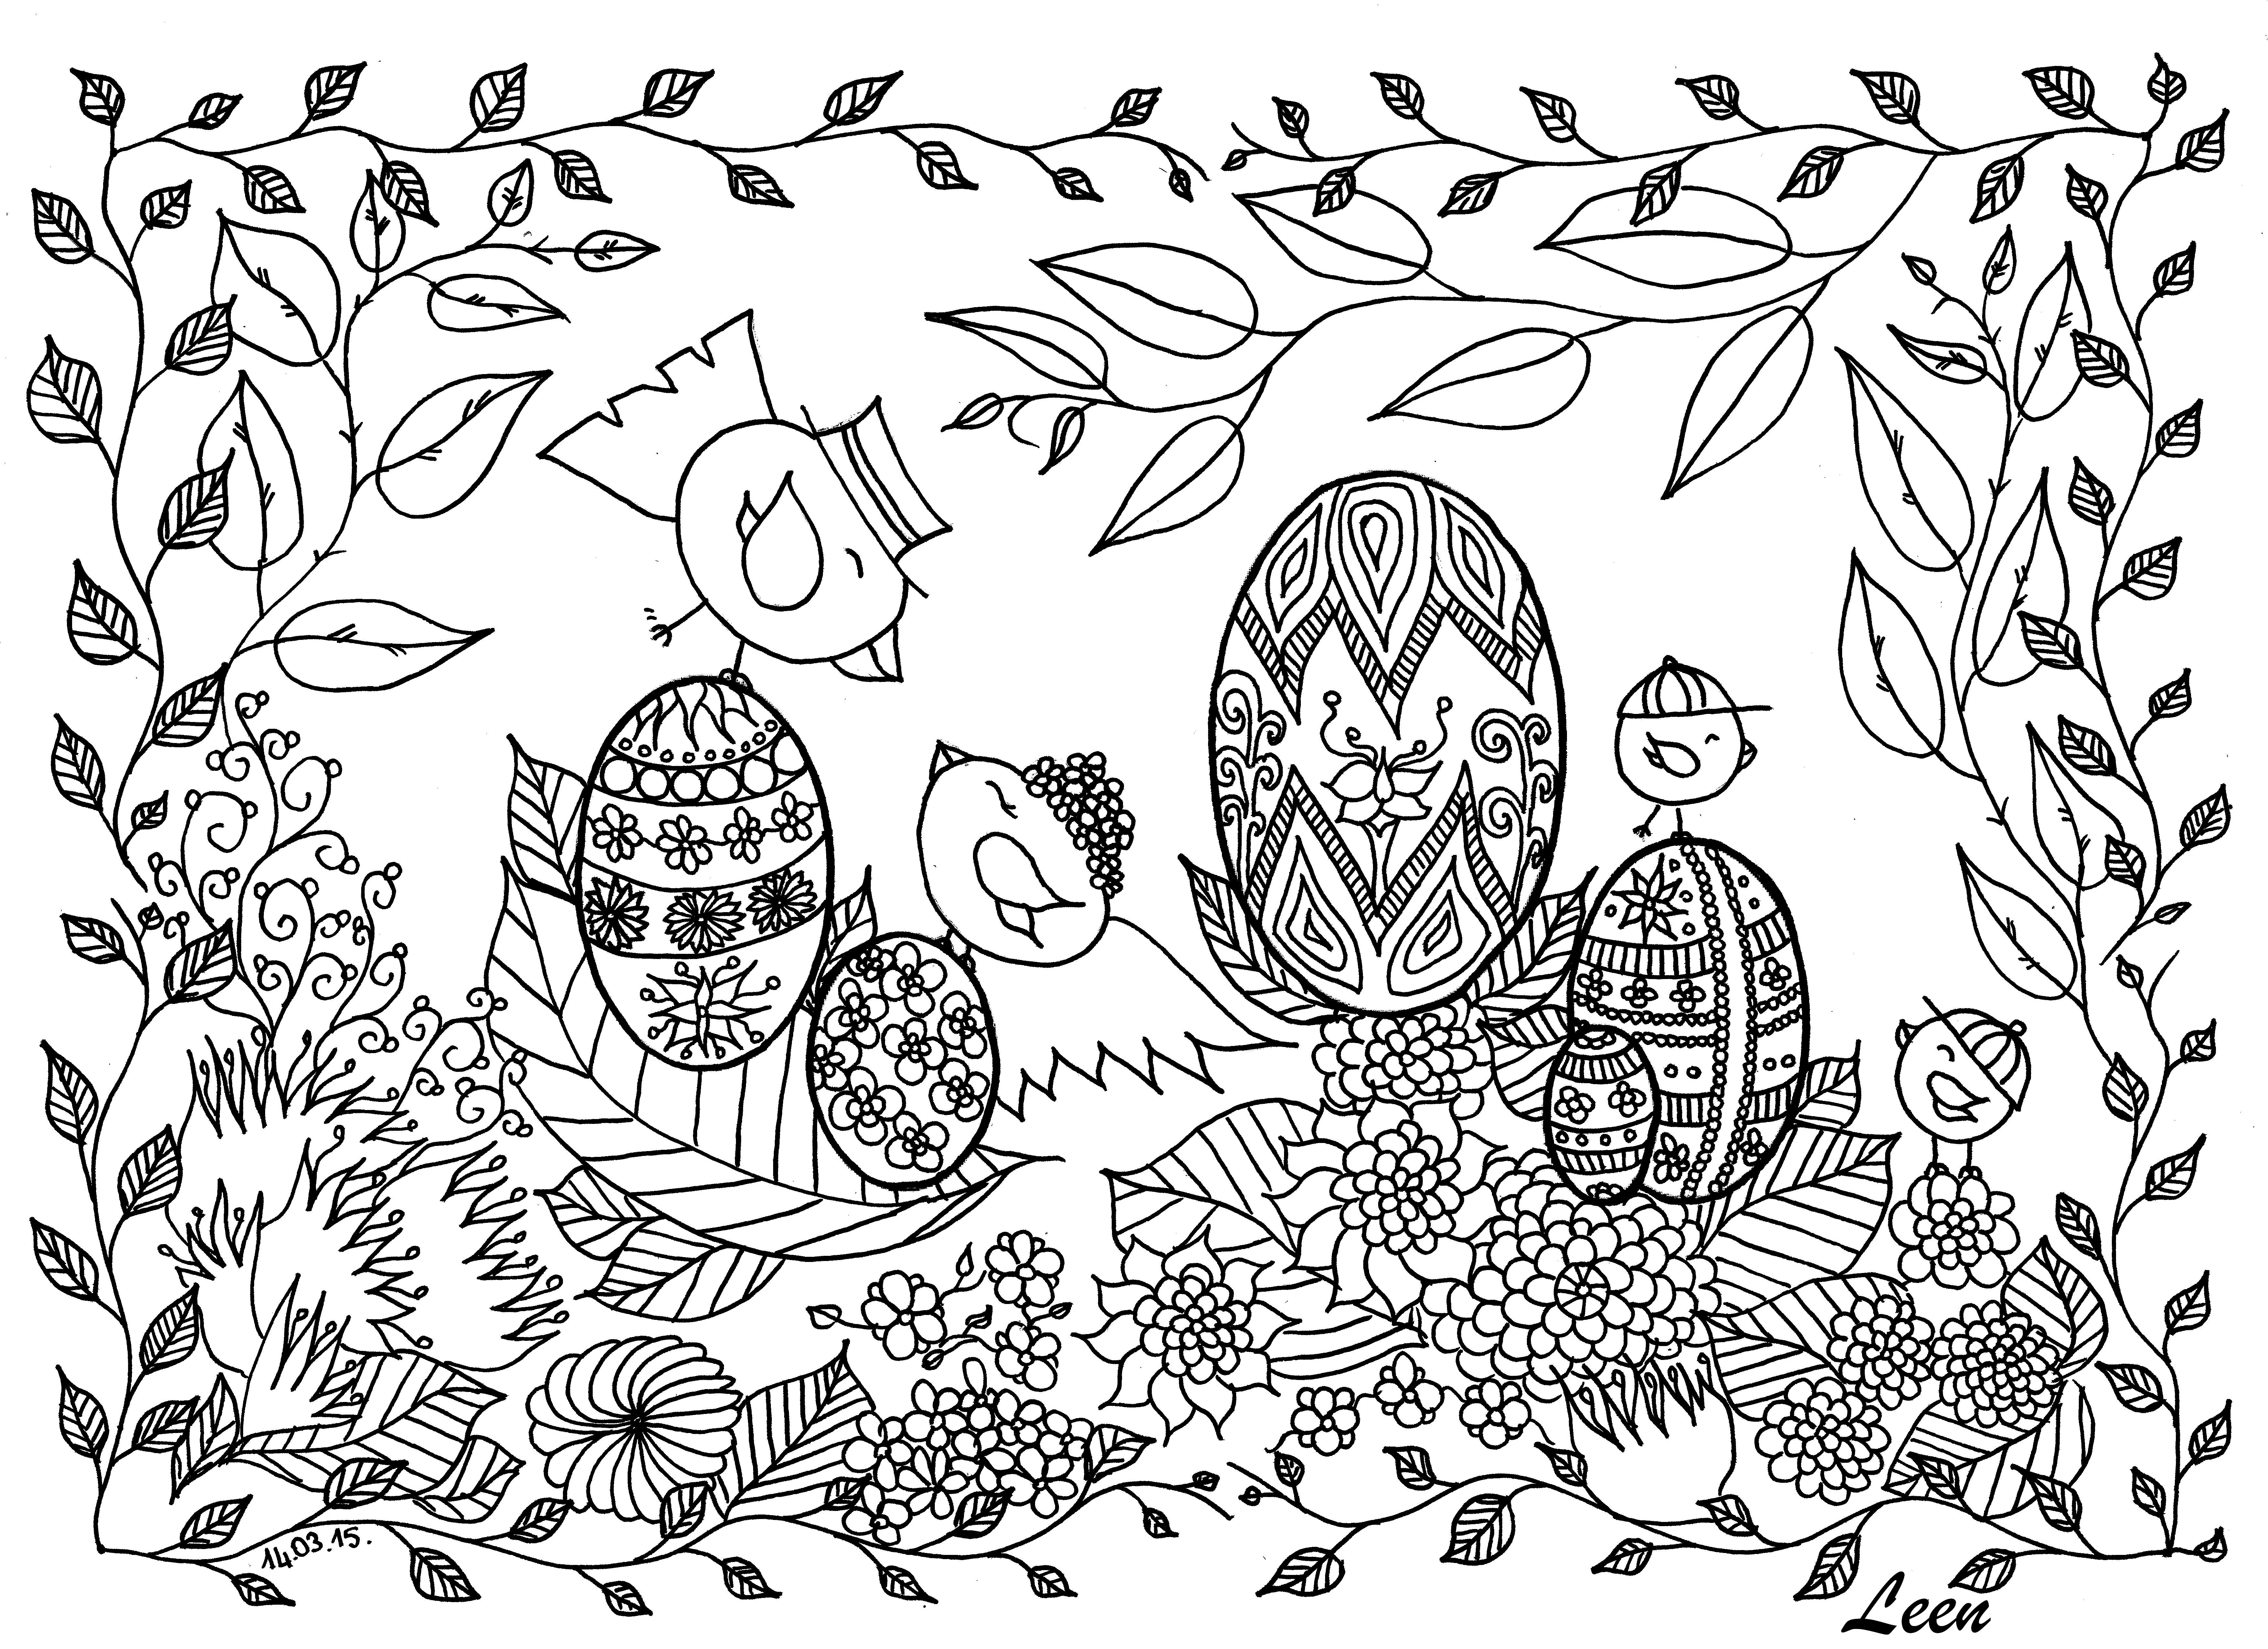 FREE Coloring Pages – Adult Coloring Worldwide